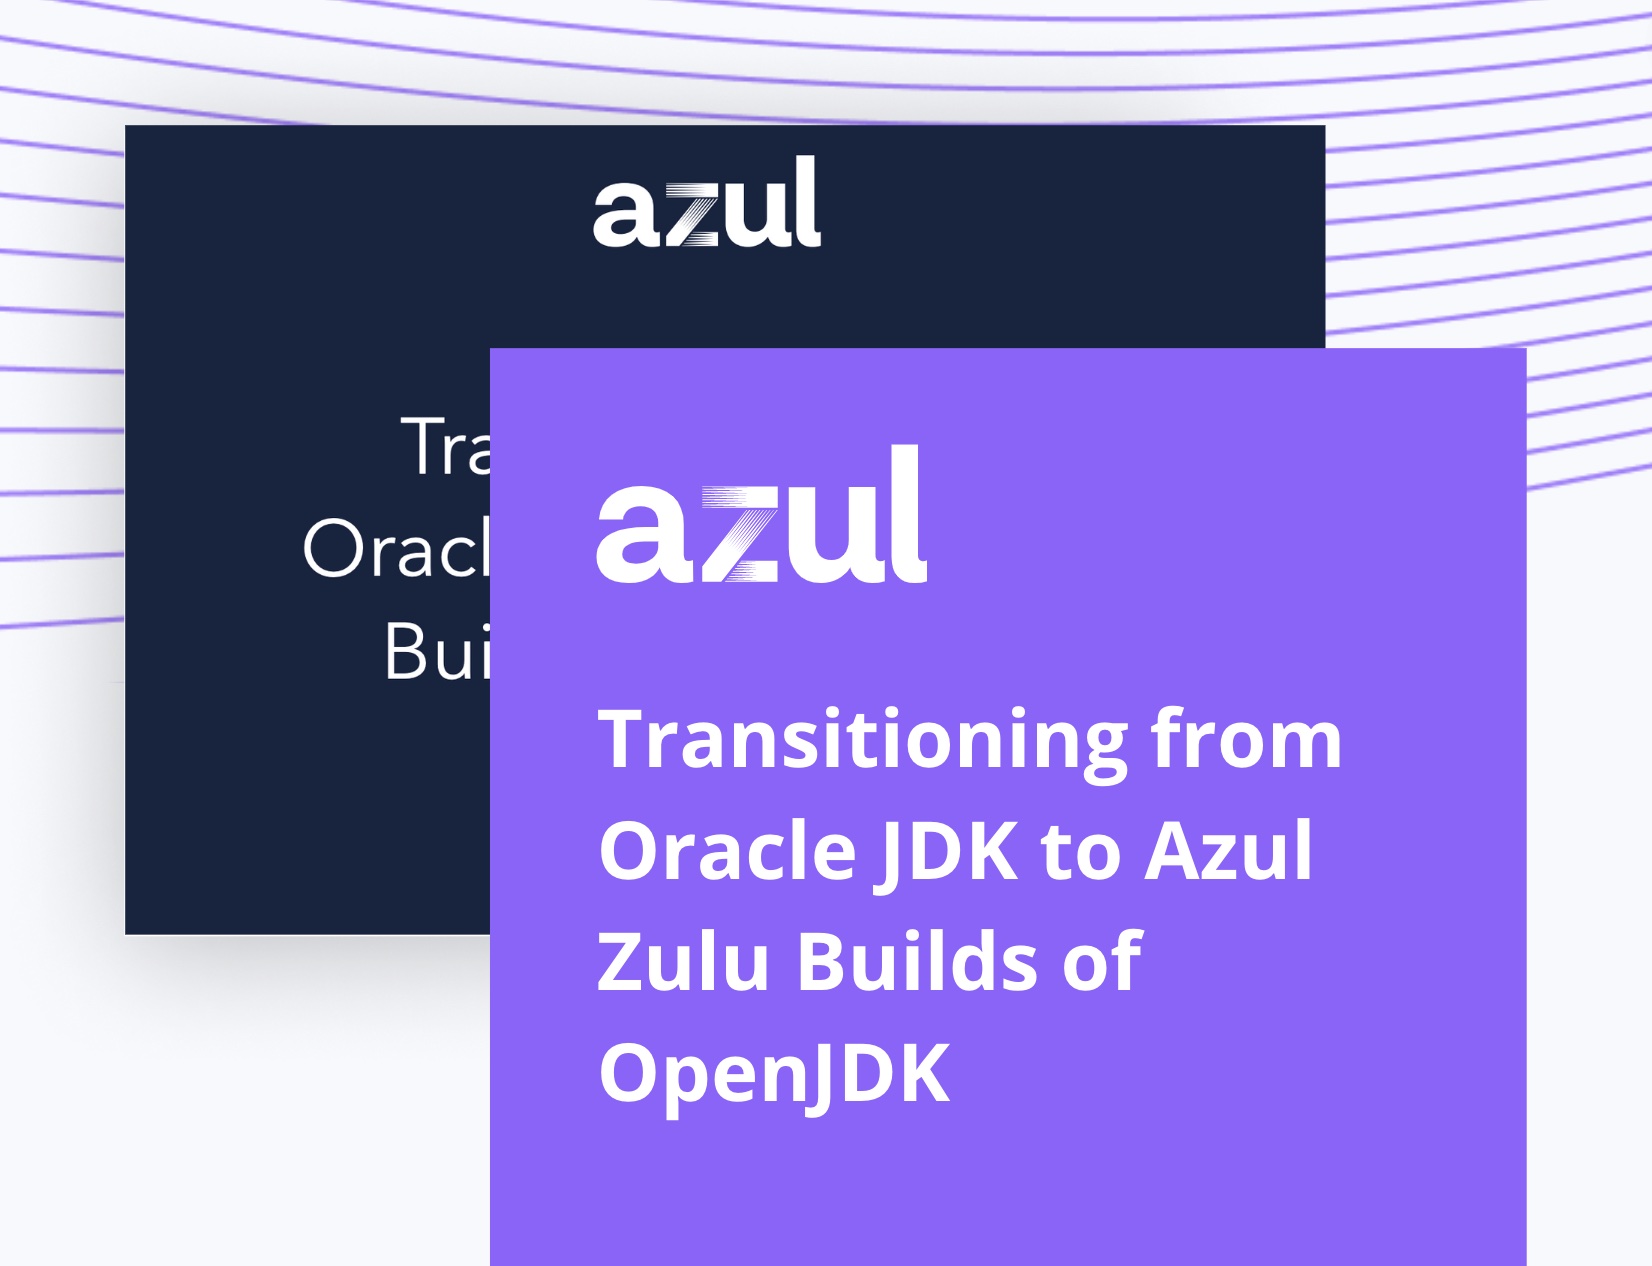 Transitioning from Oracle JDK to Azul Zulu Builds of OpenJDK